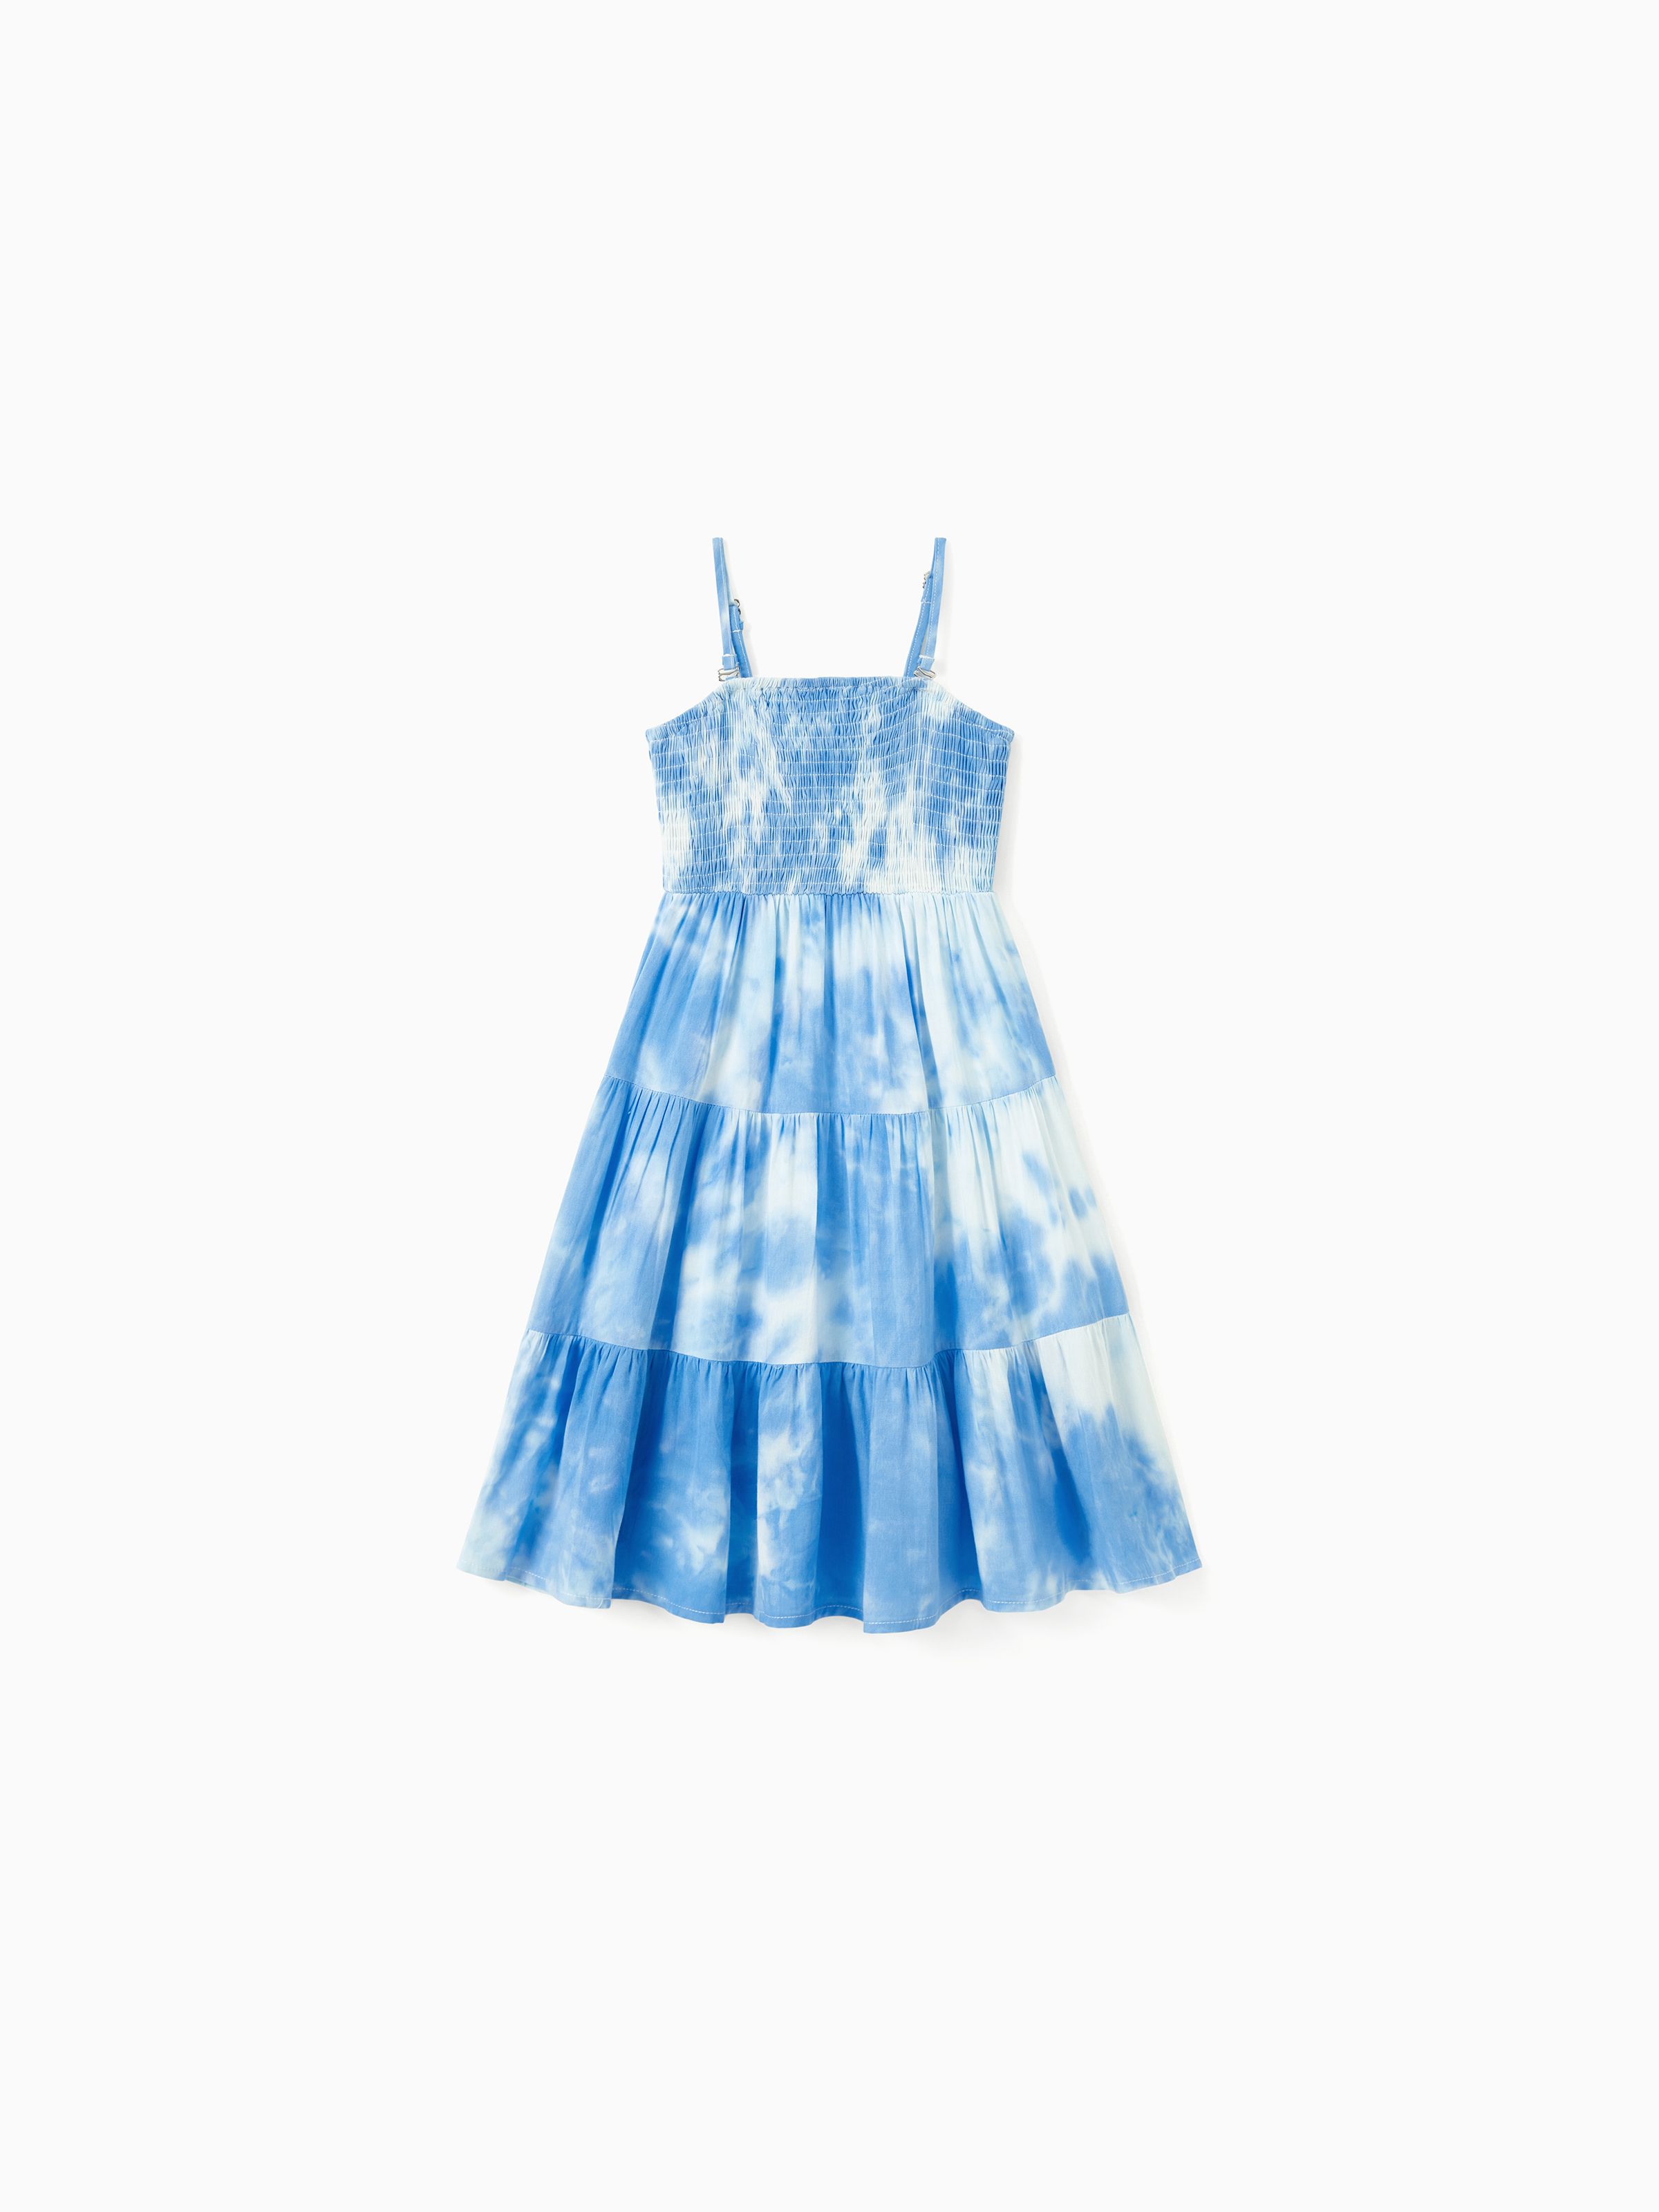 

Family Matching Sets Blue Tie-Dye Print Shirt or Strapless Shirred Top Flowy Tiered Ruffle Hem Dress